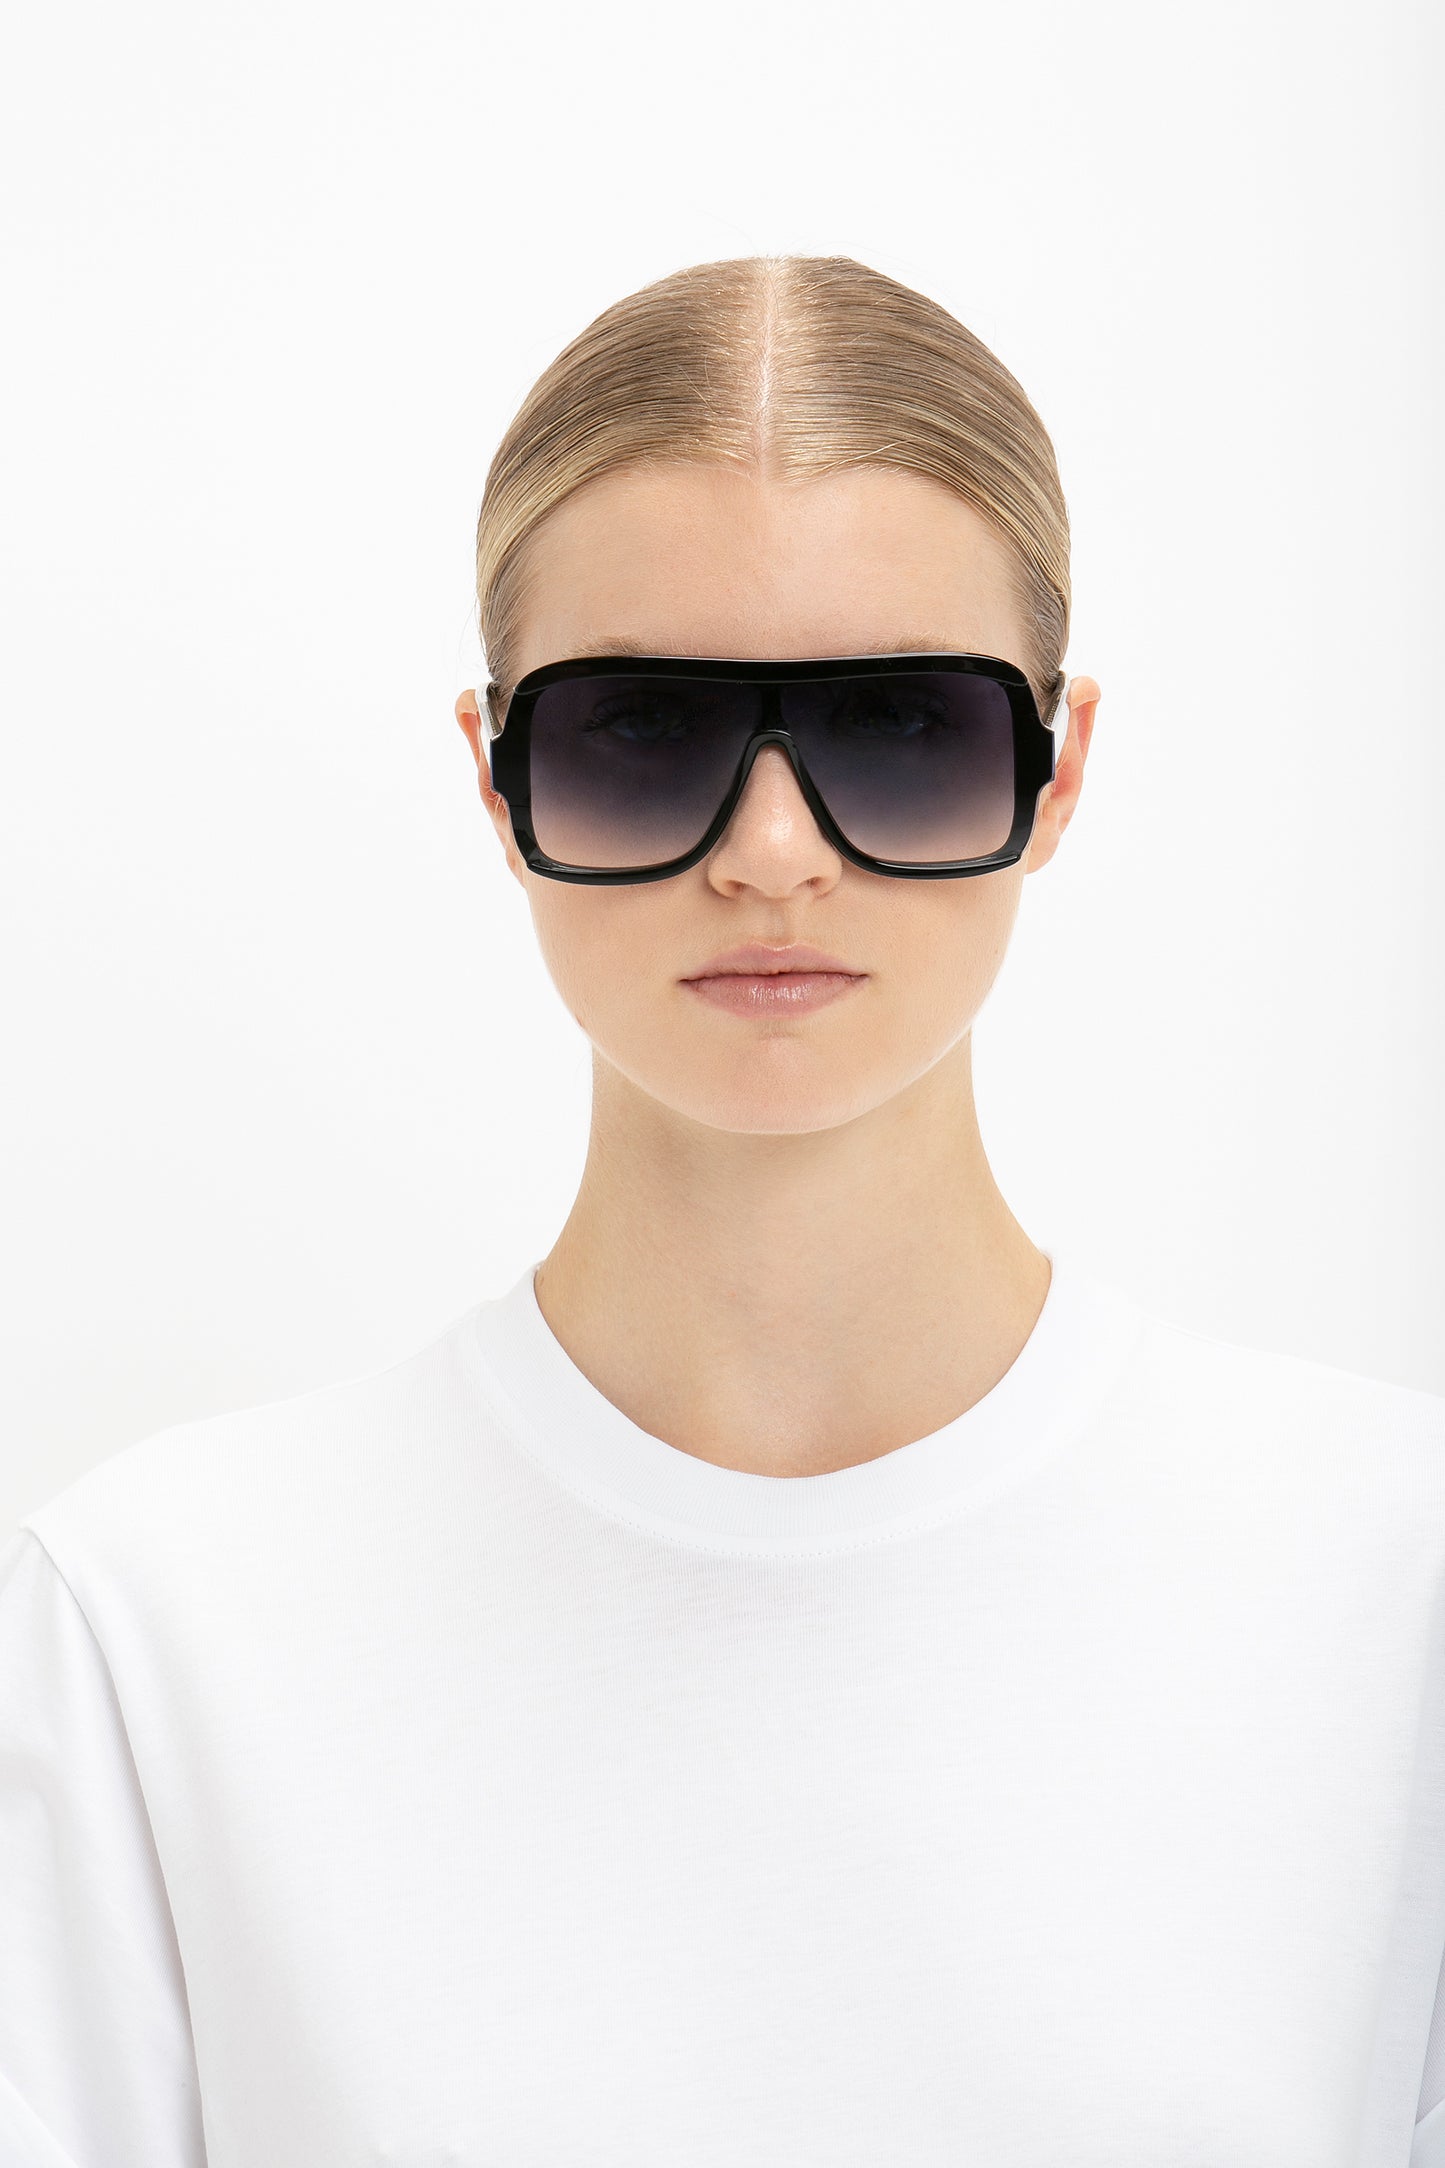 A woman wearing Layered Mask Sunglasses in Black Gradient by Victoria Beckham.